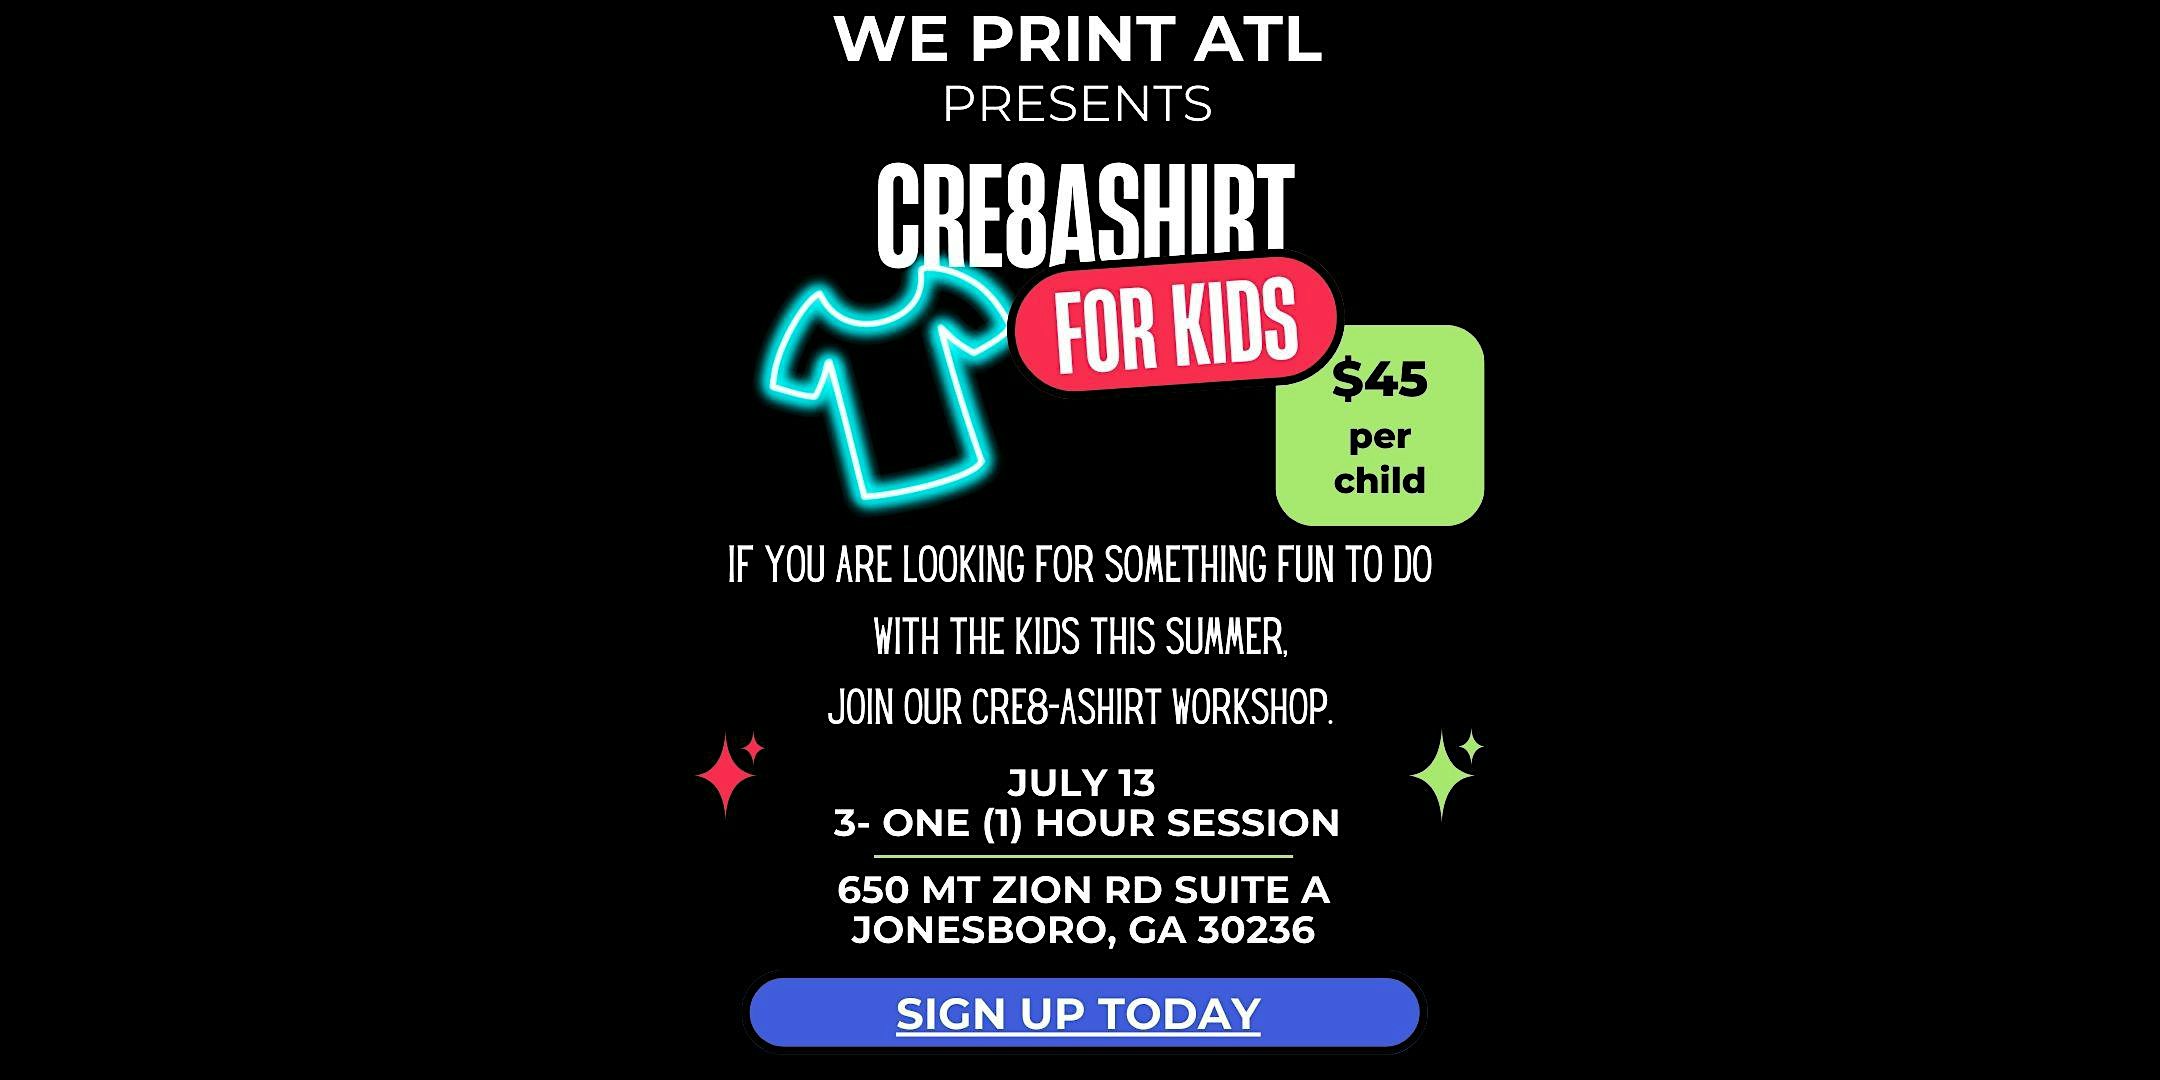 CRE8ASHIRT for Kids